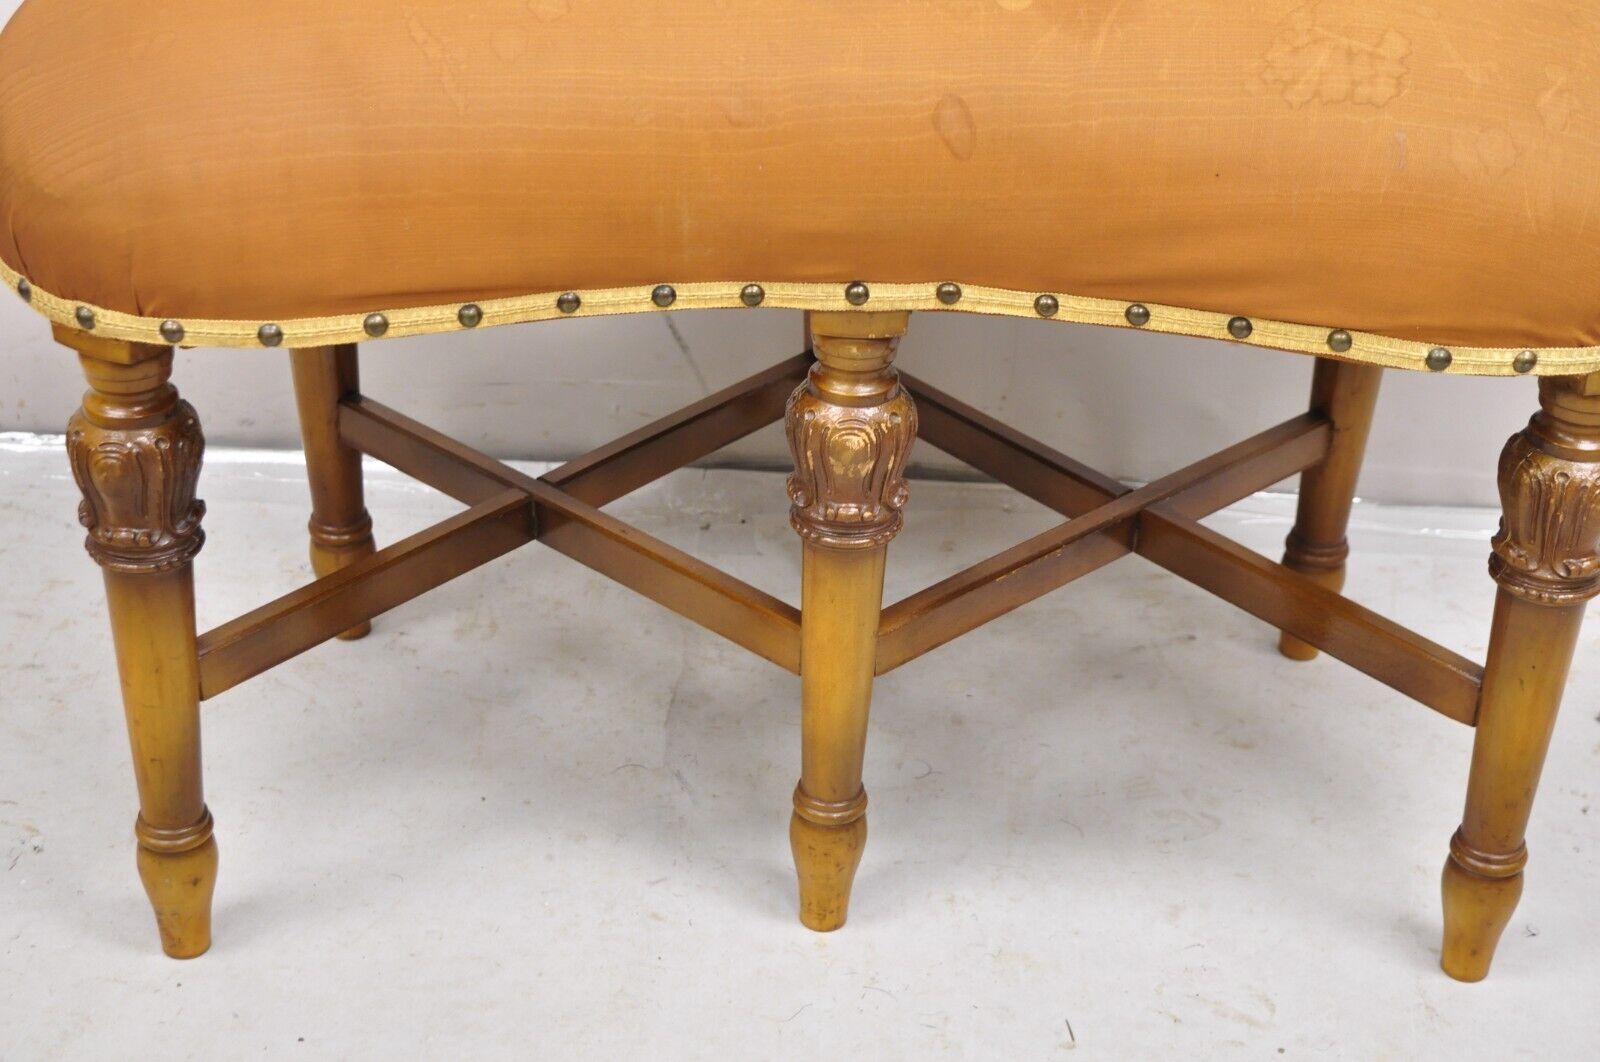 Antique Joerns Bros Kidney Bean 6 Leg French Provincial Vanity Bench Seat In Good Condition For Sale In Philadelphia, PA